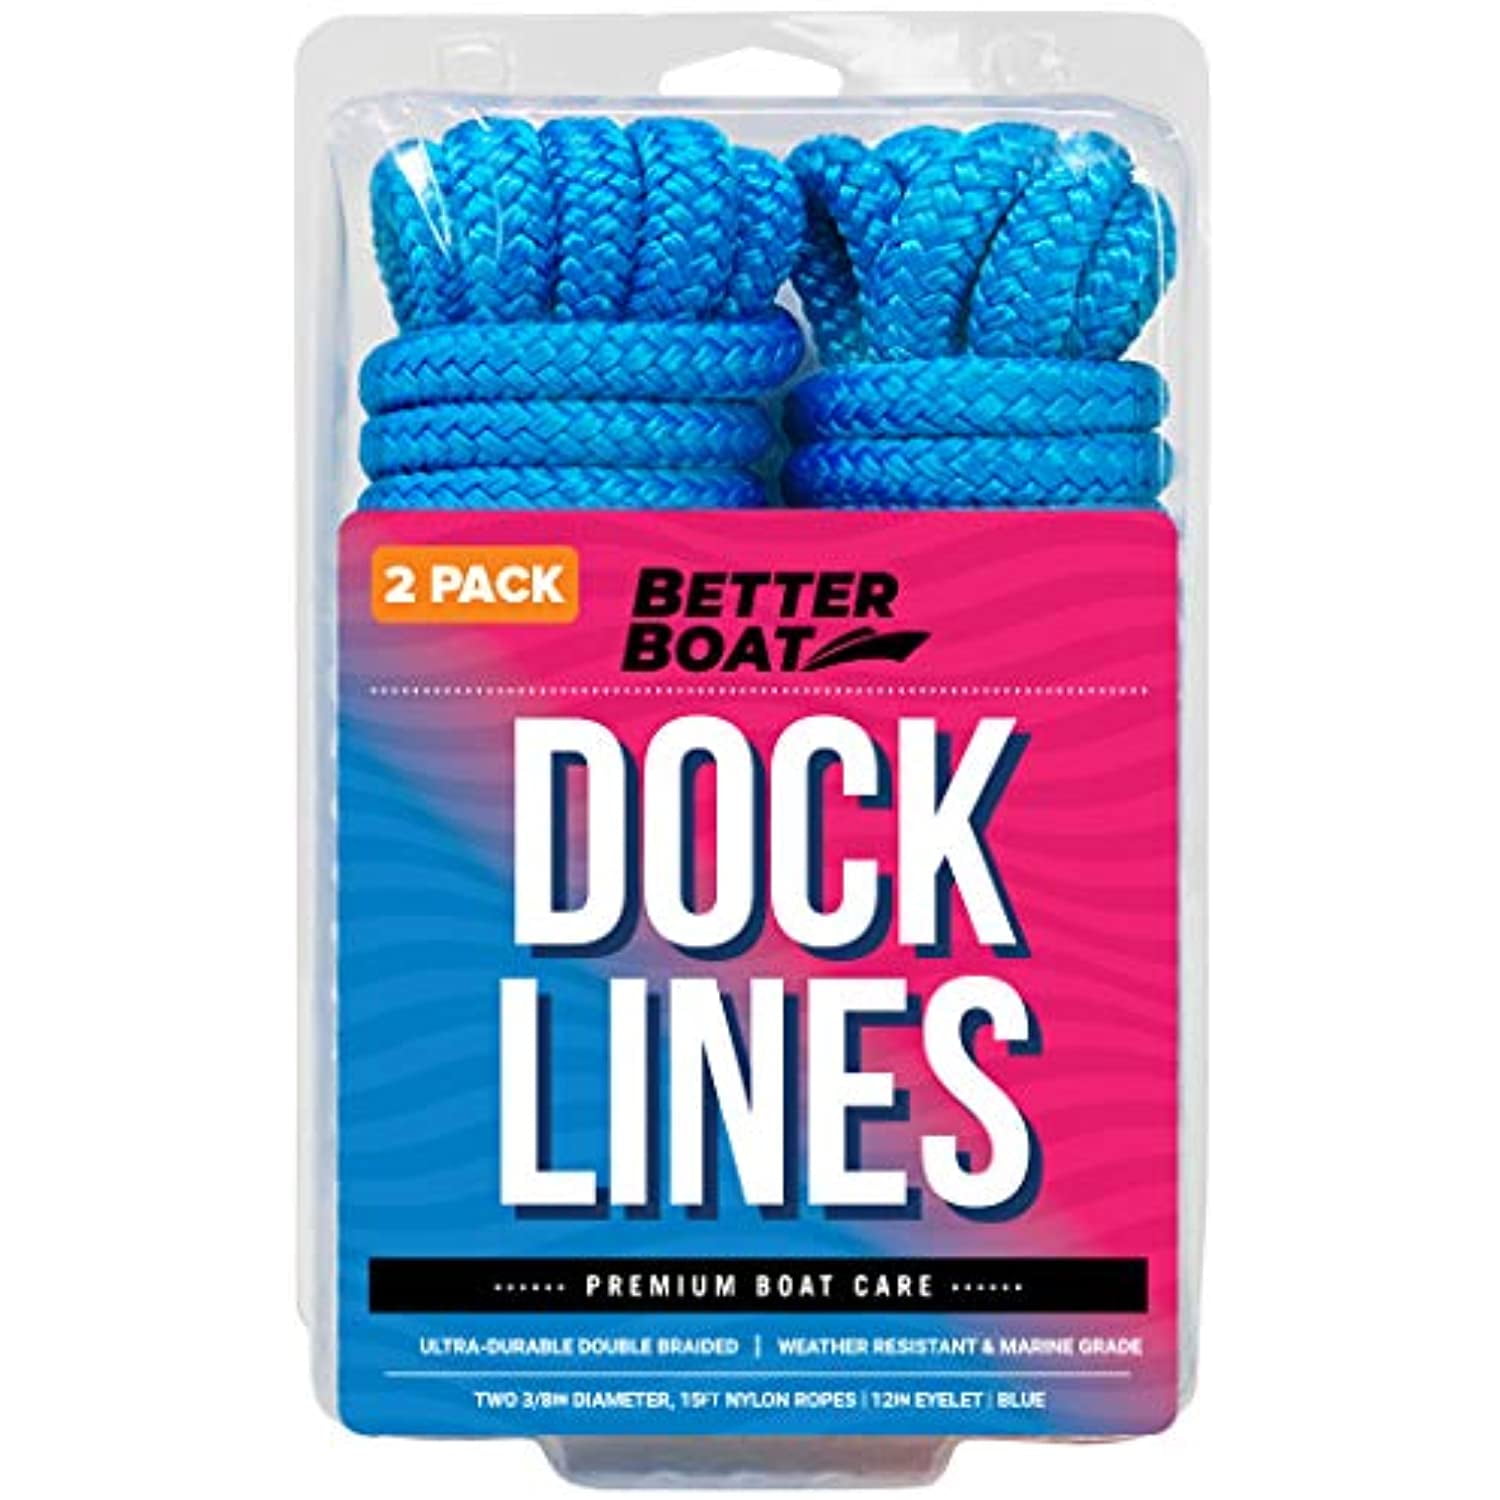 Boat Dock Lines Dock Rope Mooring Rope Boat Accessory Double Braided Nylon Docking Line for Boats Docking Fender 4 Pack 